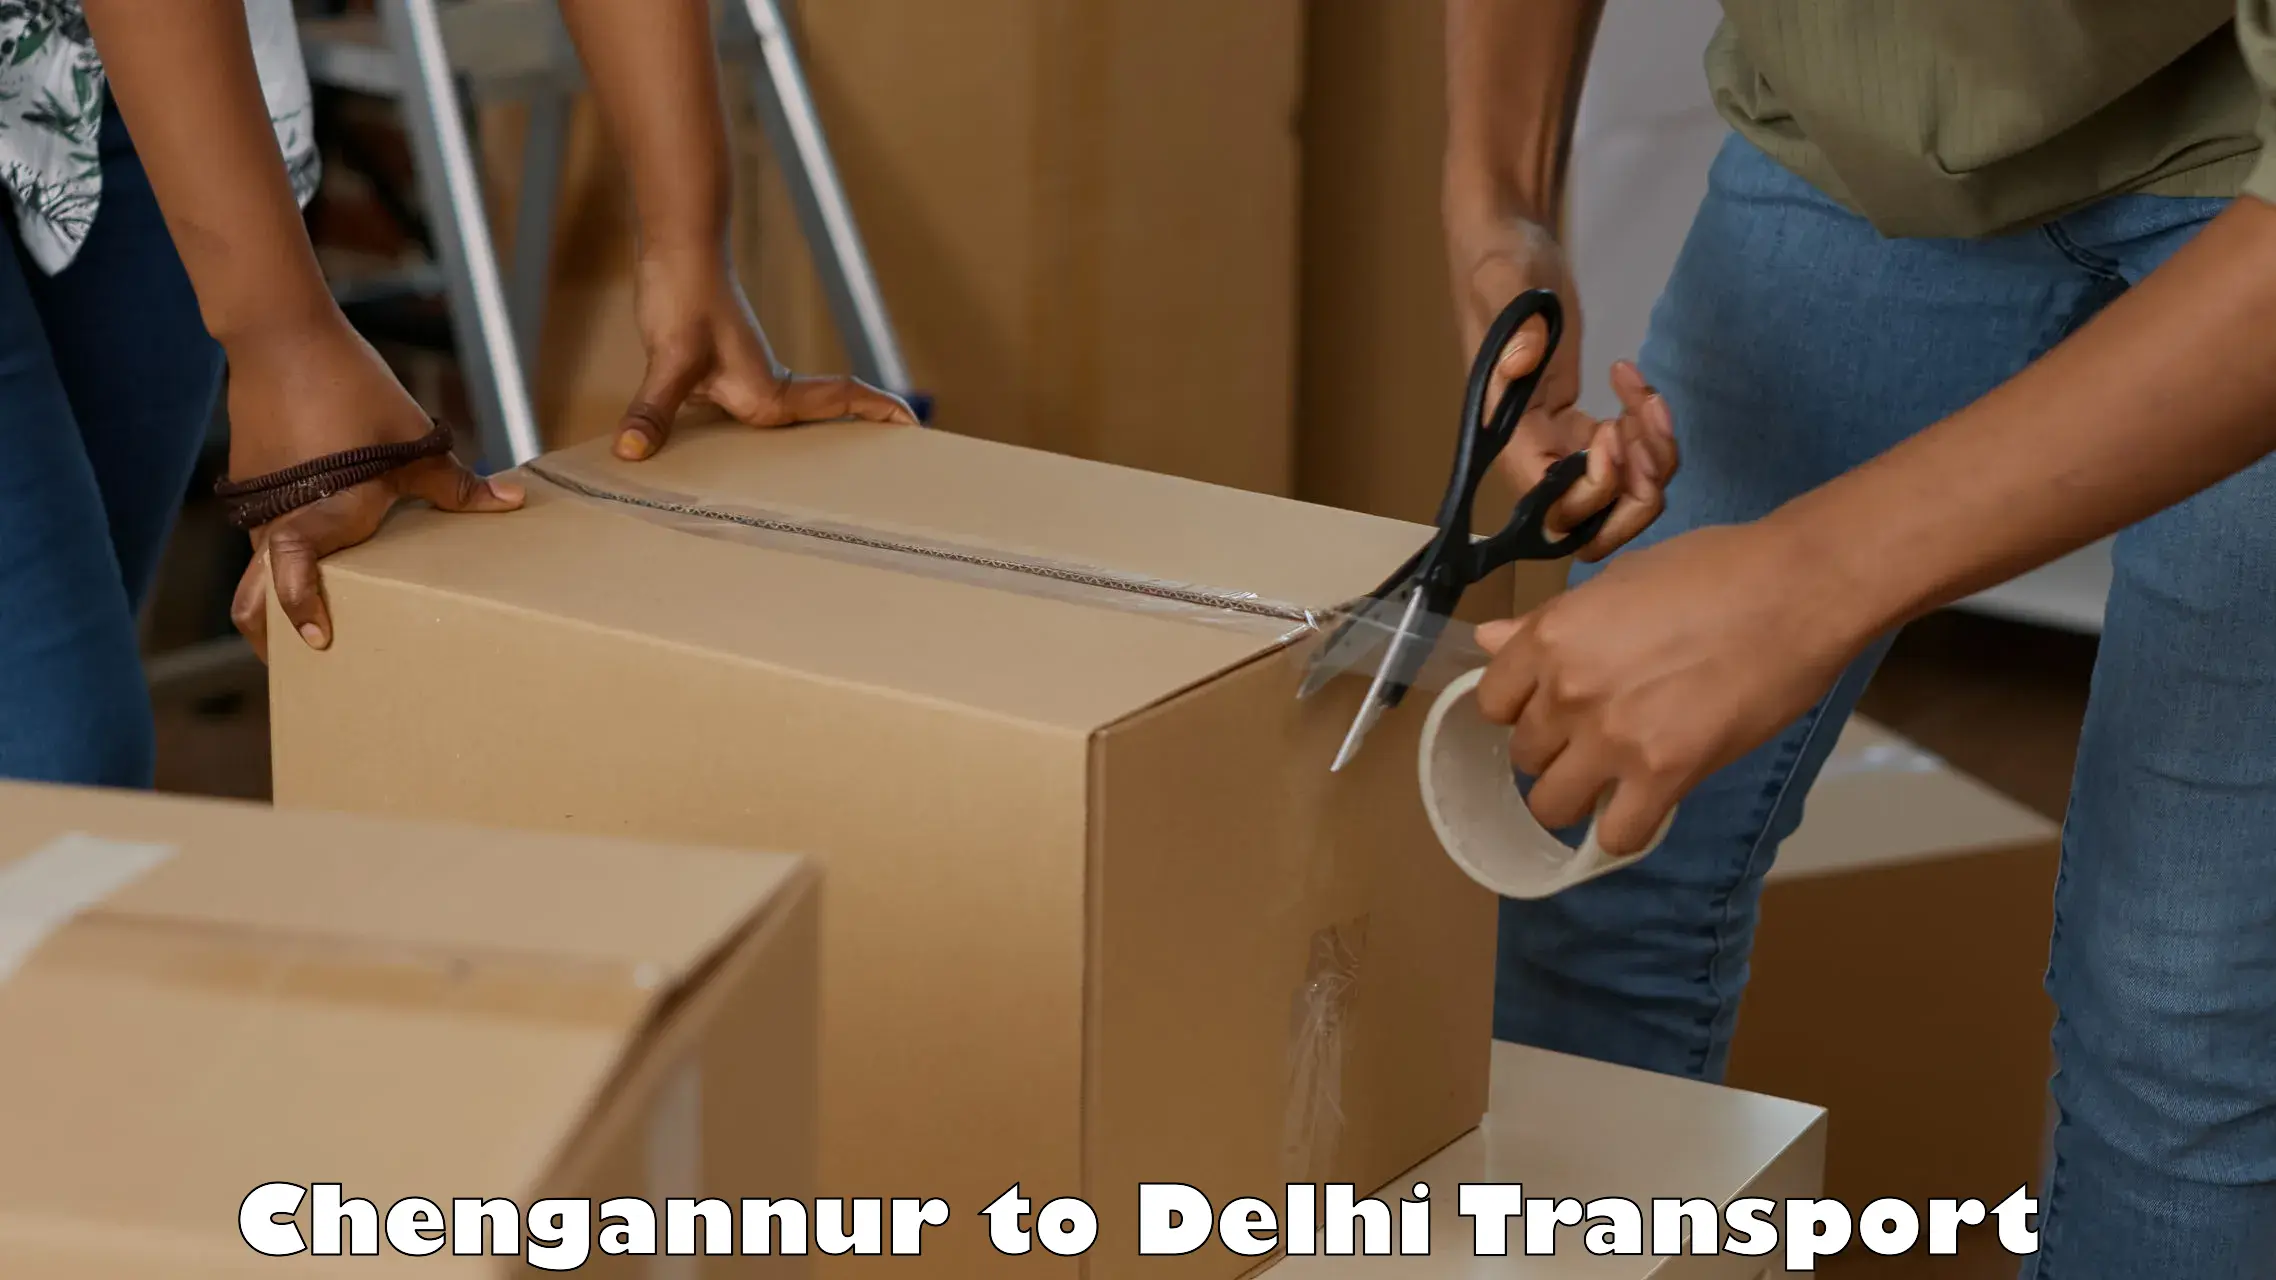 Vehicle parcel service Chengannur to NCR